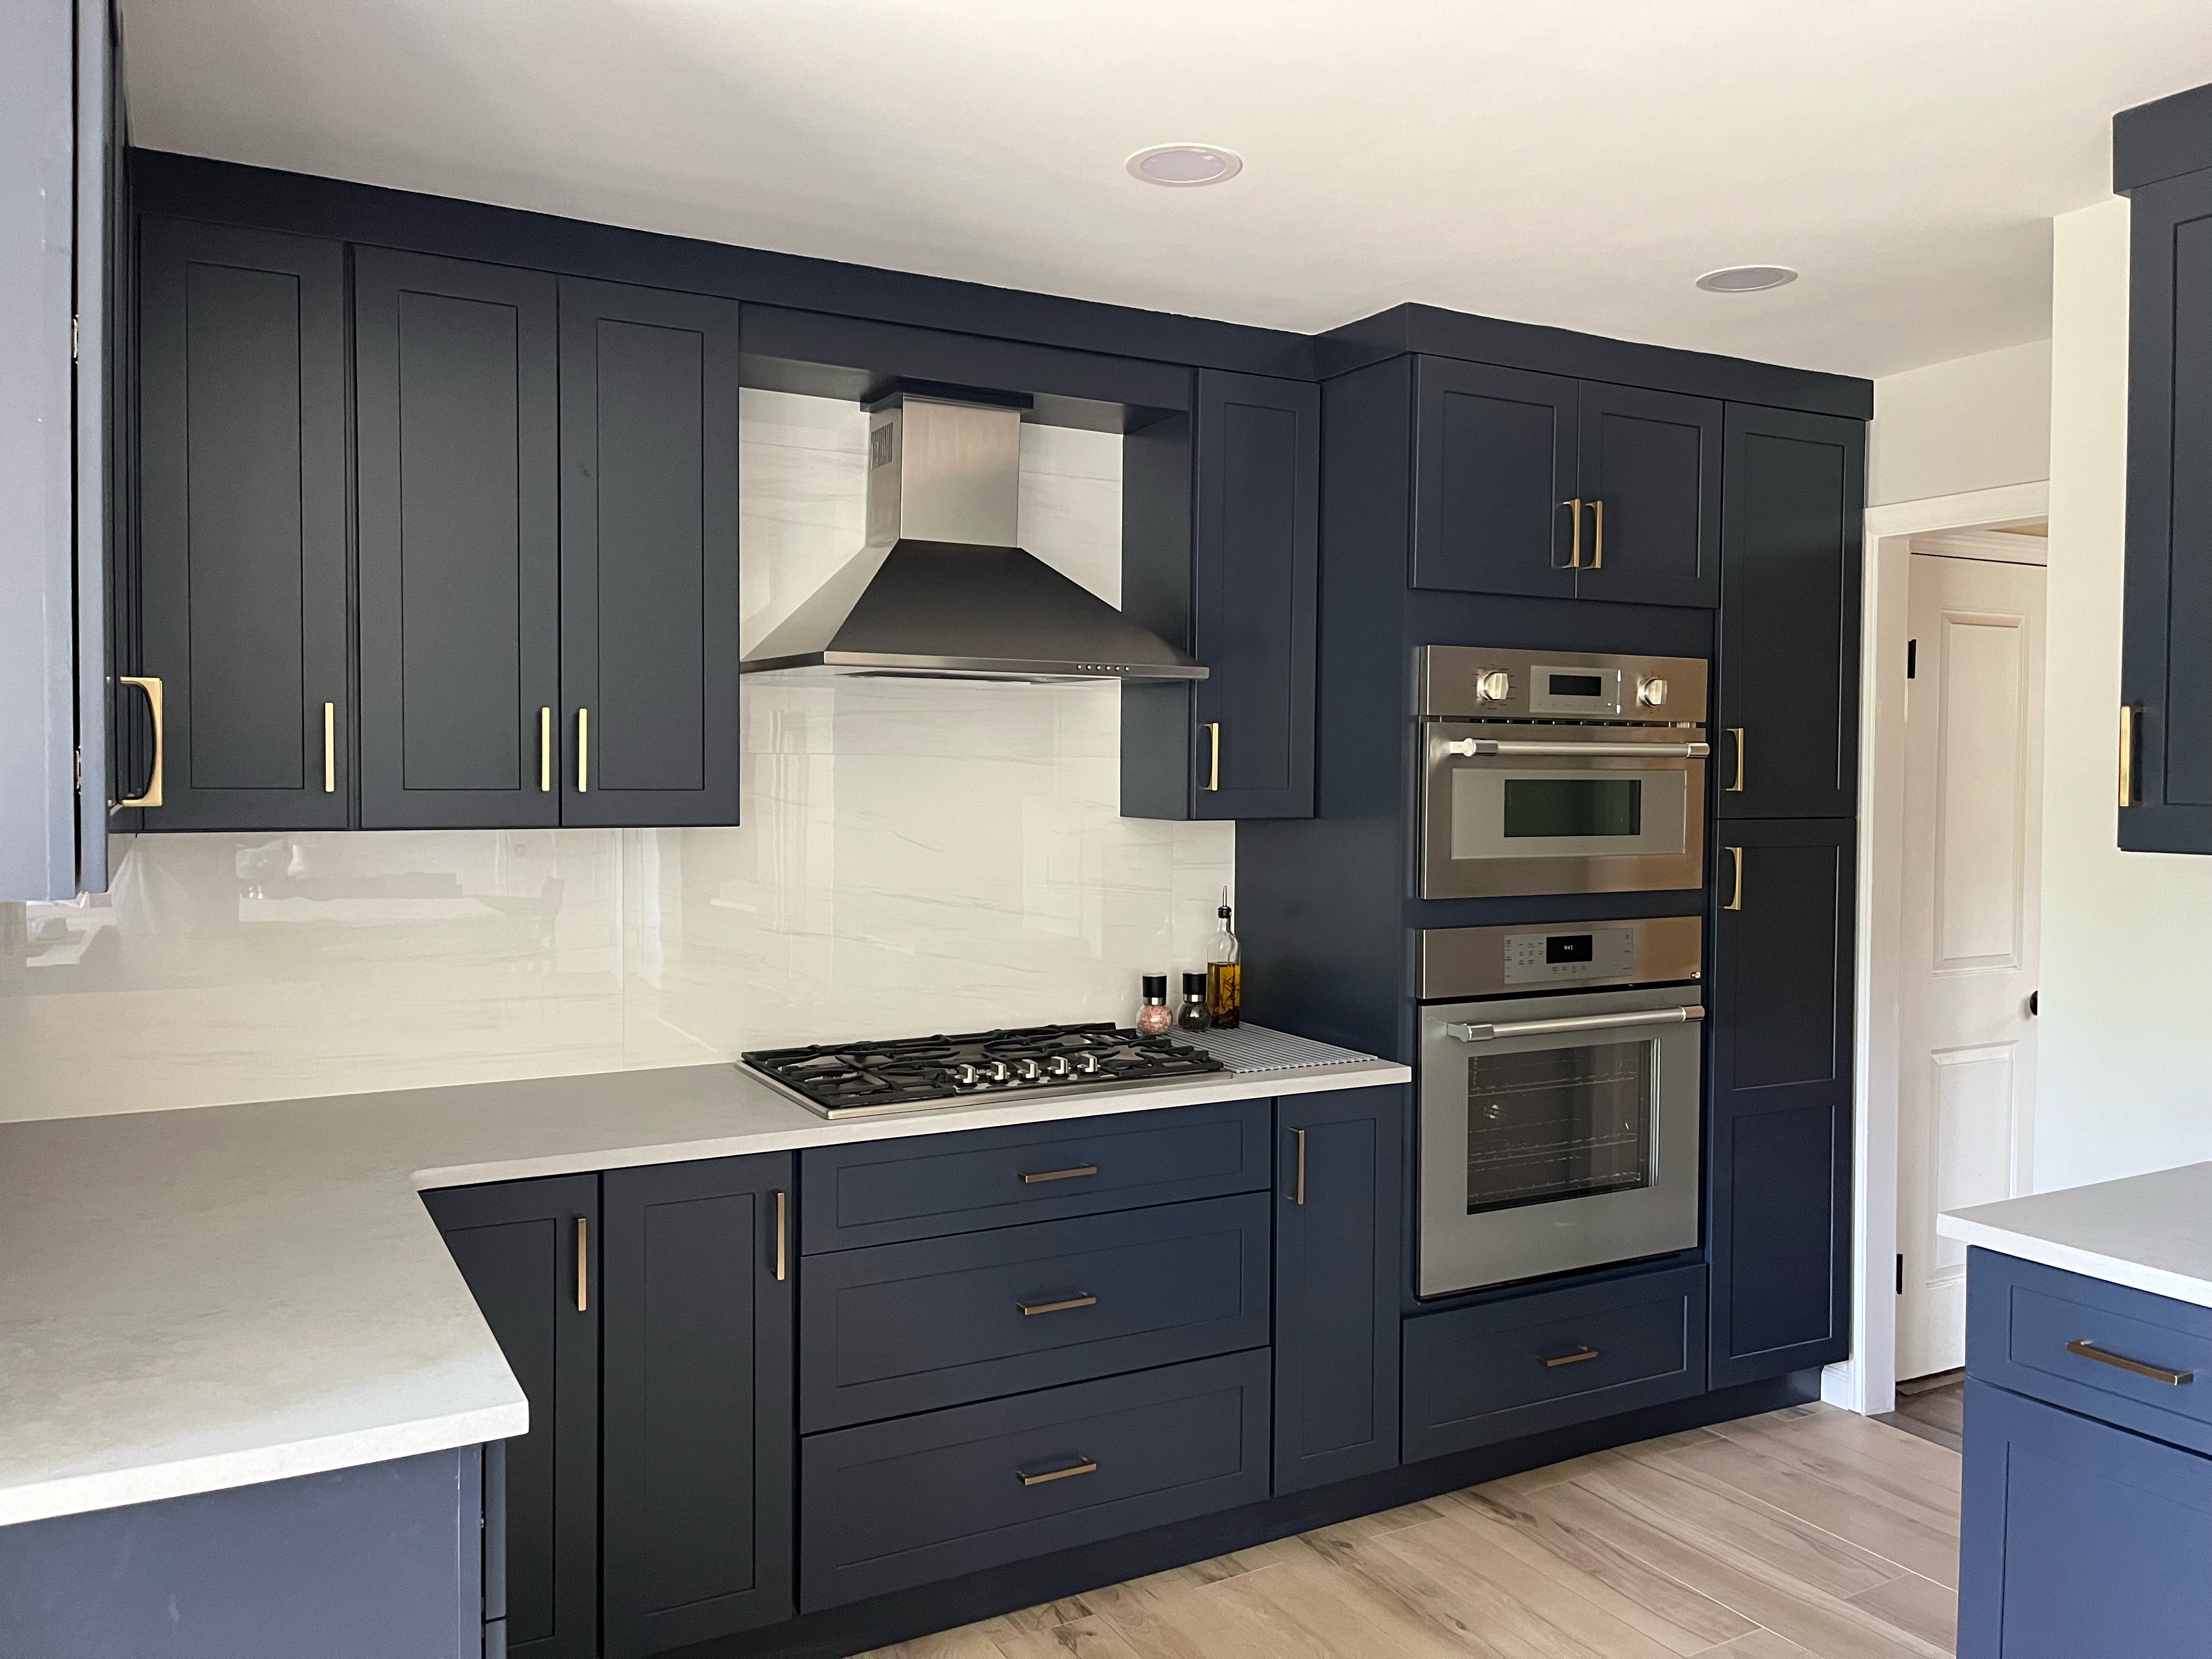 Fabuwood Allure Galaxy Indigo blue shaker kitchen with cook top, stainless hood and caesarstone countertop